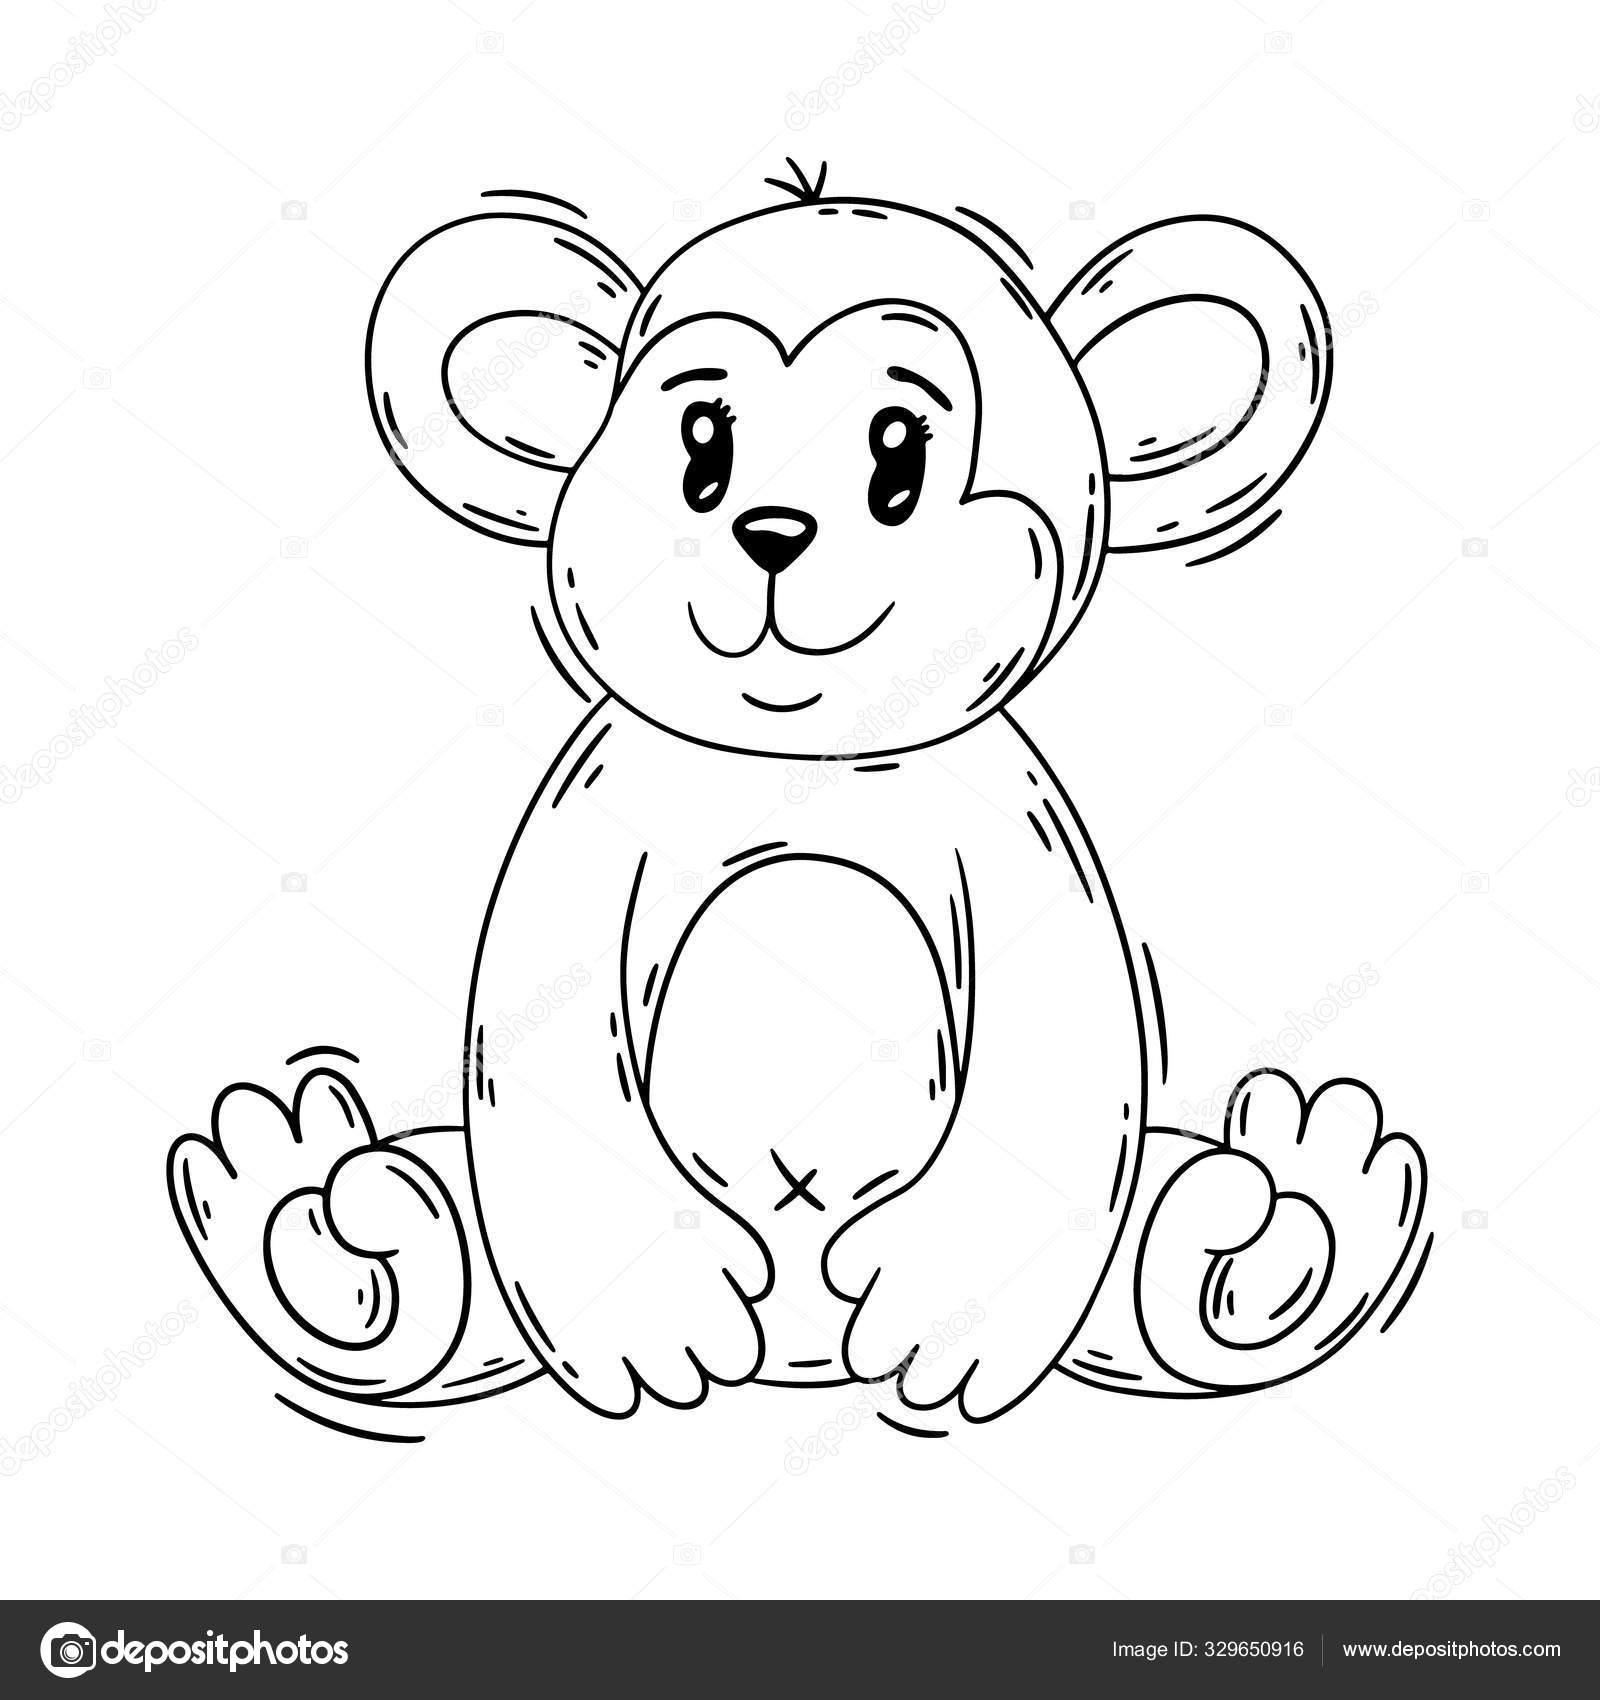 Cute Cartoon Baby Monkey Animal Print Vector Illustration Isolated On A White Background Vector Image By C Ismagilovilnaz999 Vector Stock